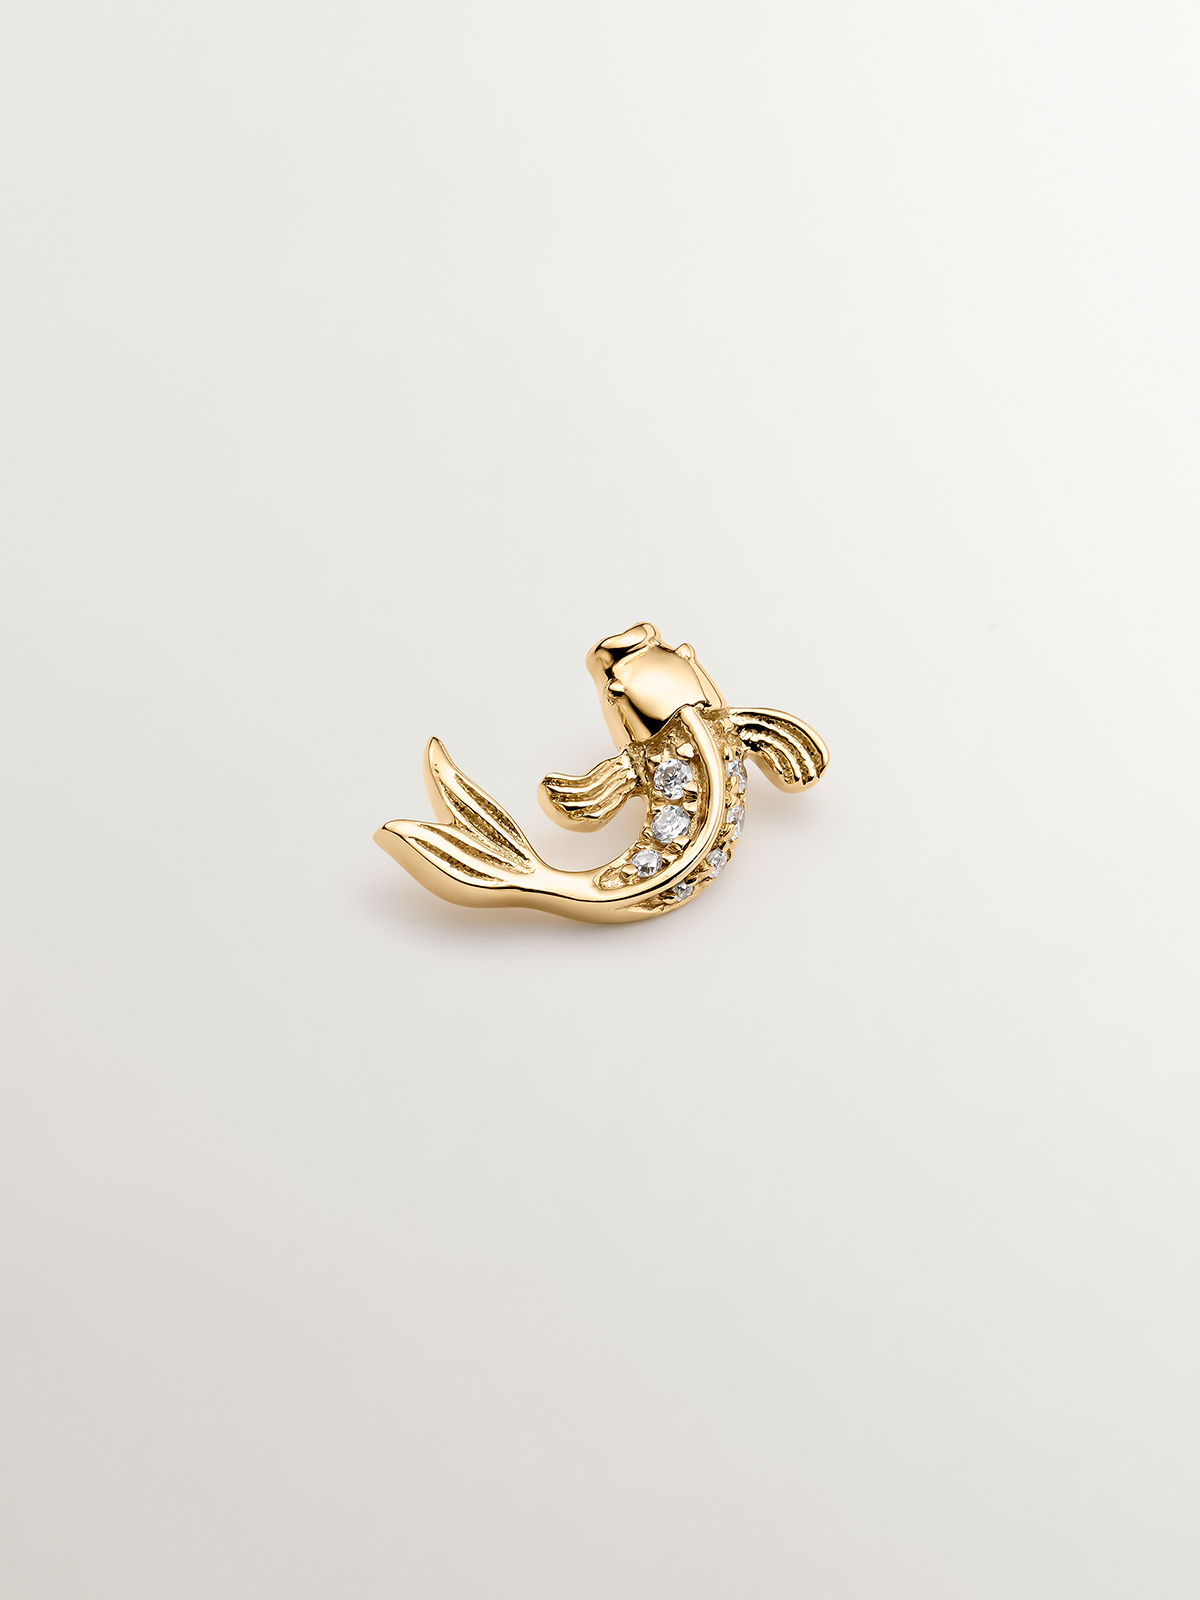 Individual 18K yellow gold earring with diamond-shaped fish.